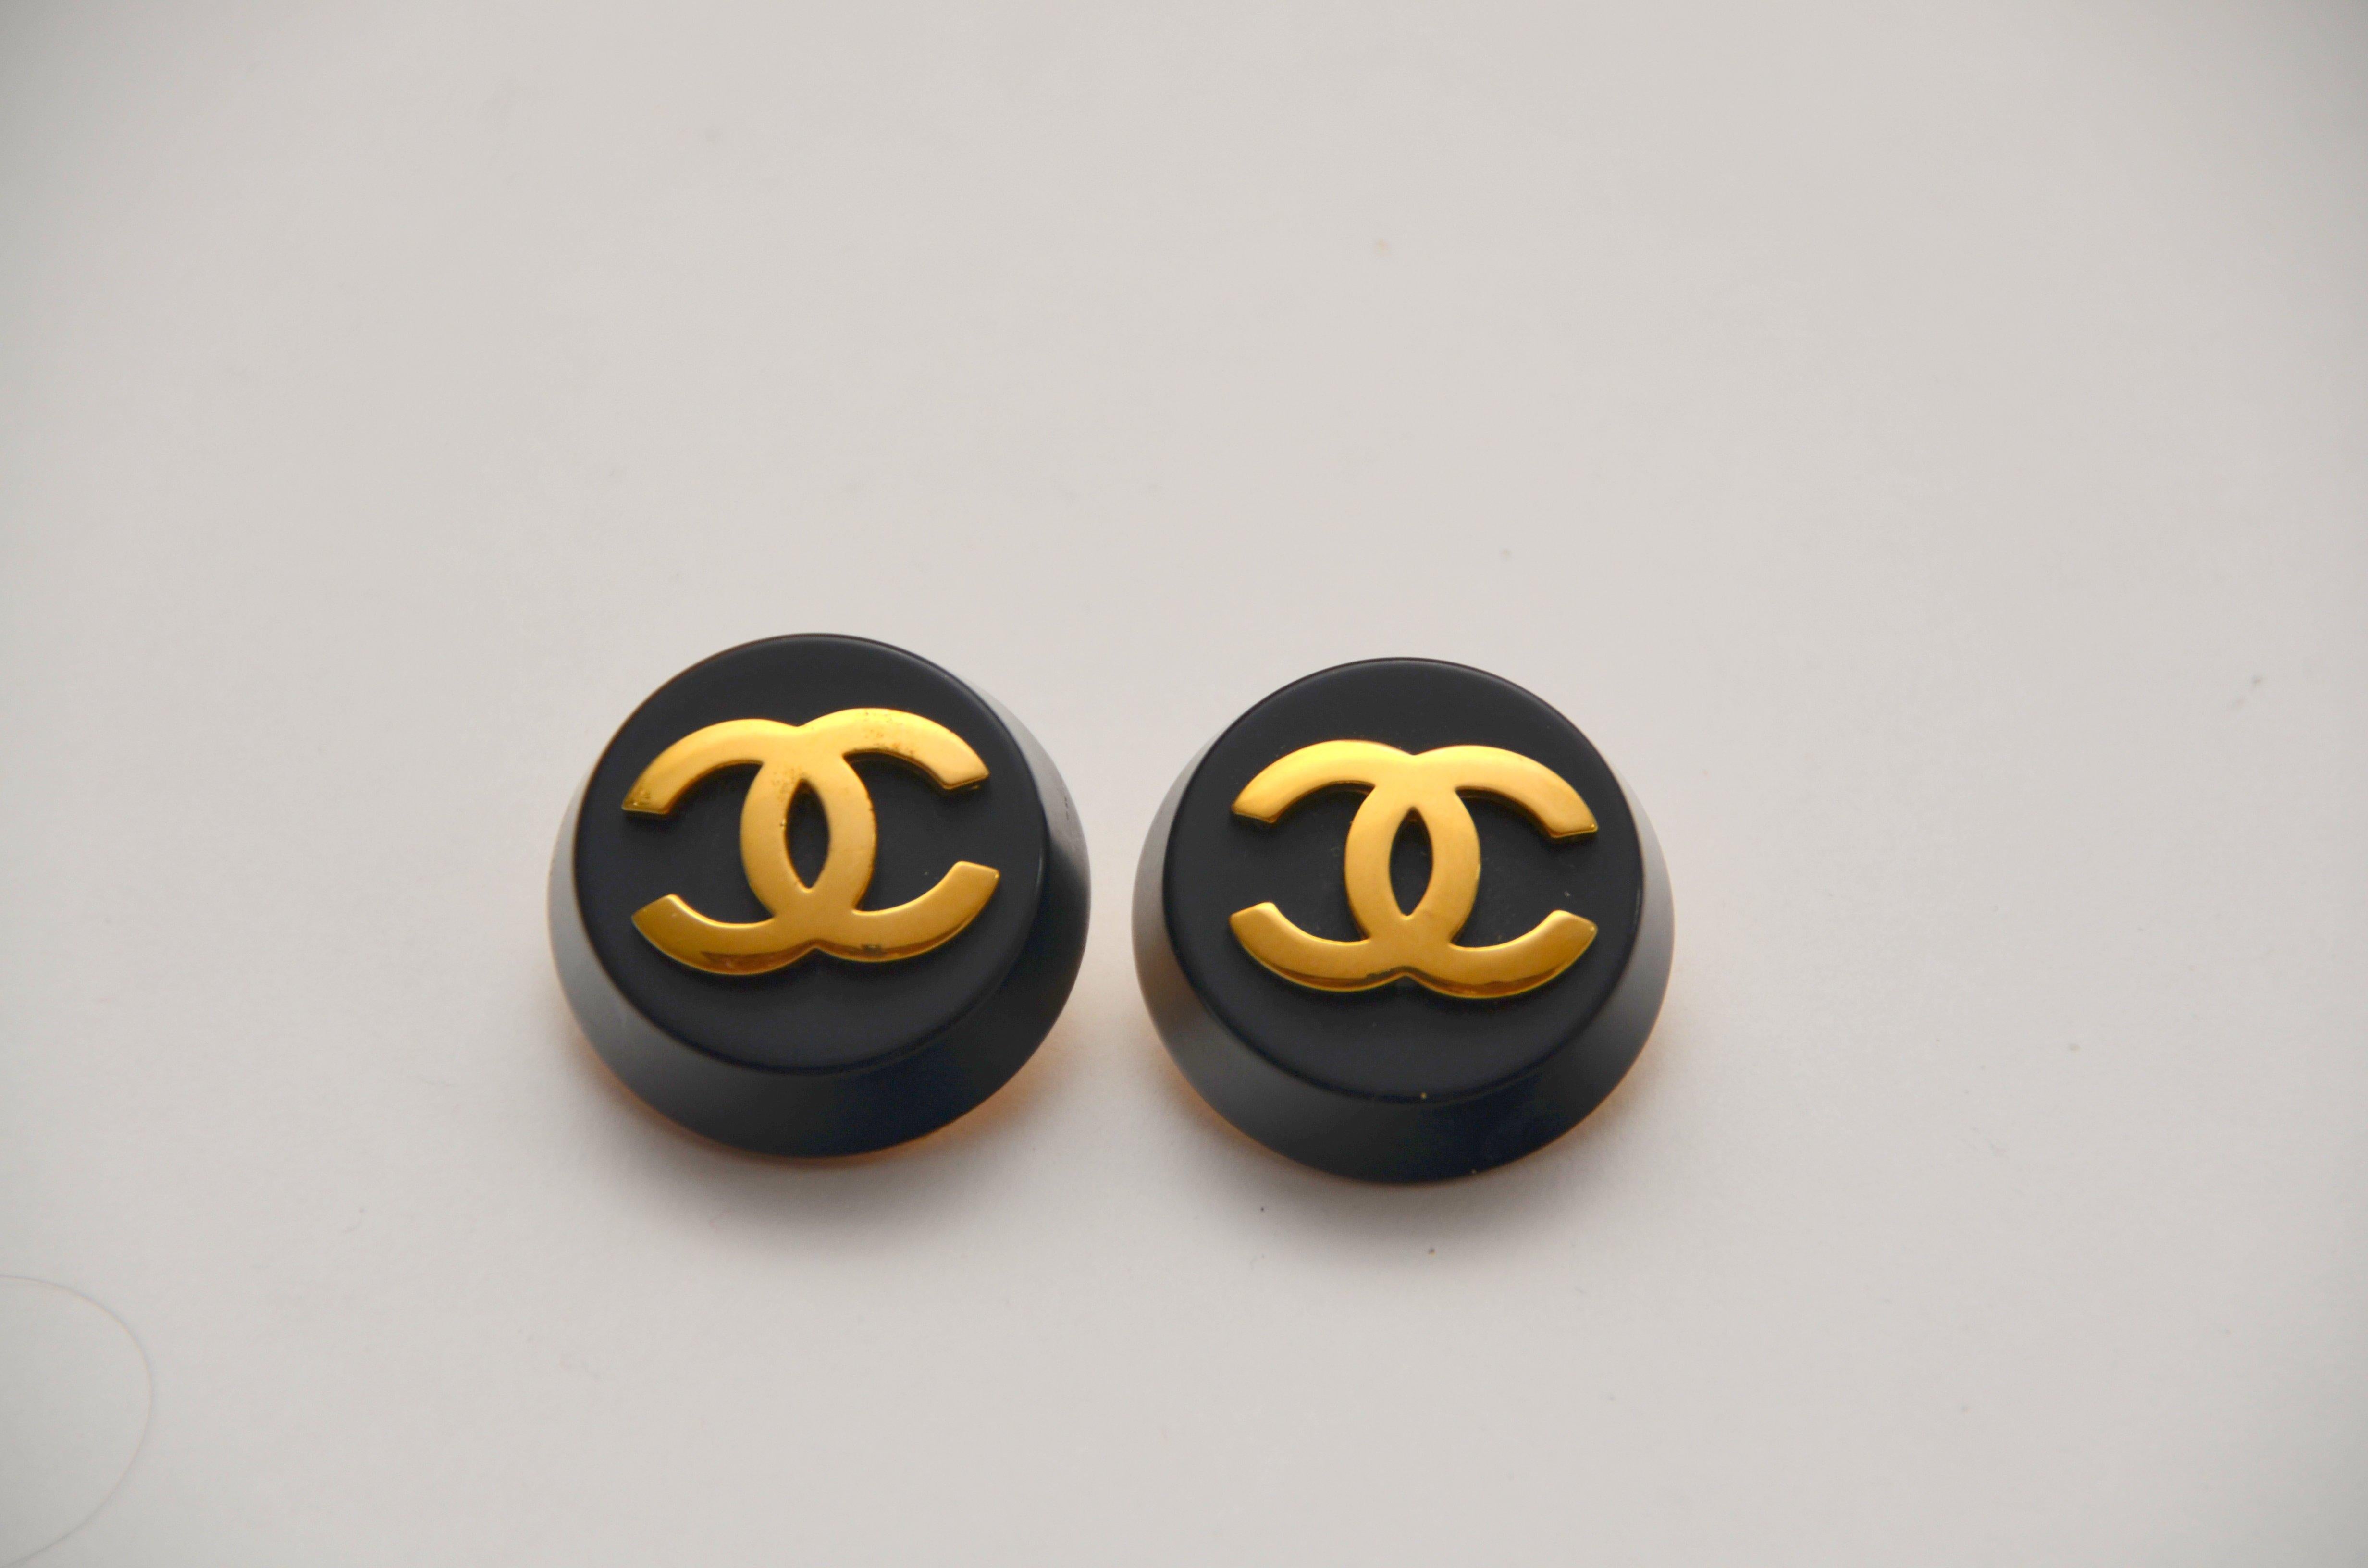 Chanel large size clip earrings
Vintage
Some glue showing on the back of the earring.
Please see picture
Condition:Good
Final sale